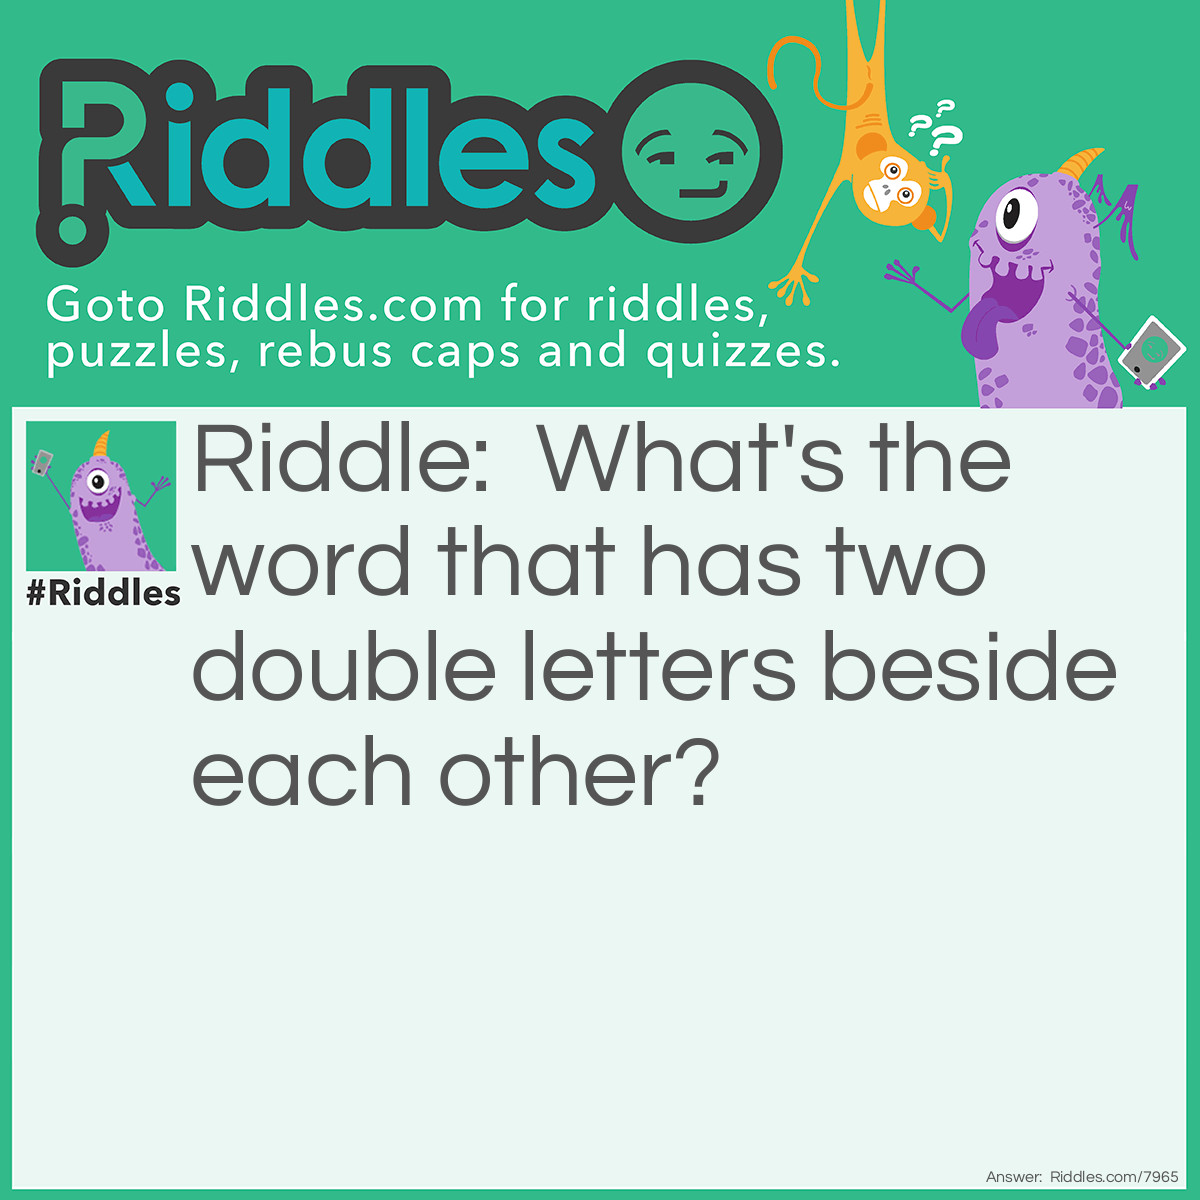 Riddle: What's the word that has two double letters beside each other? Answer: Coffee!